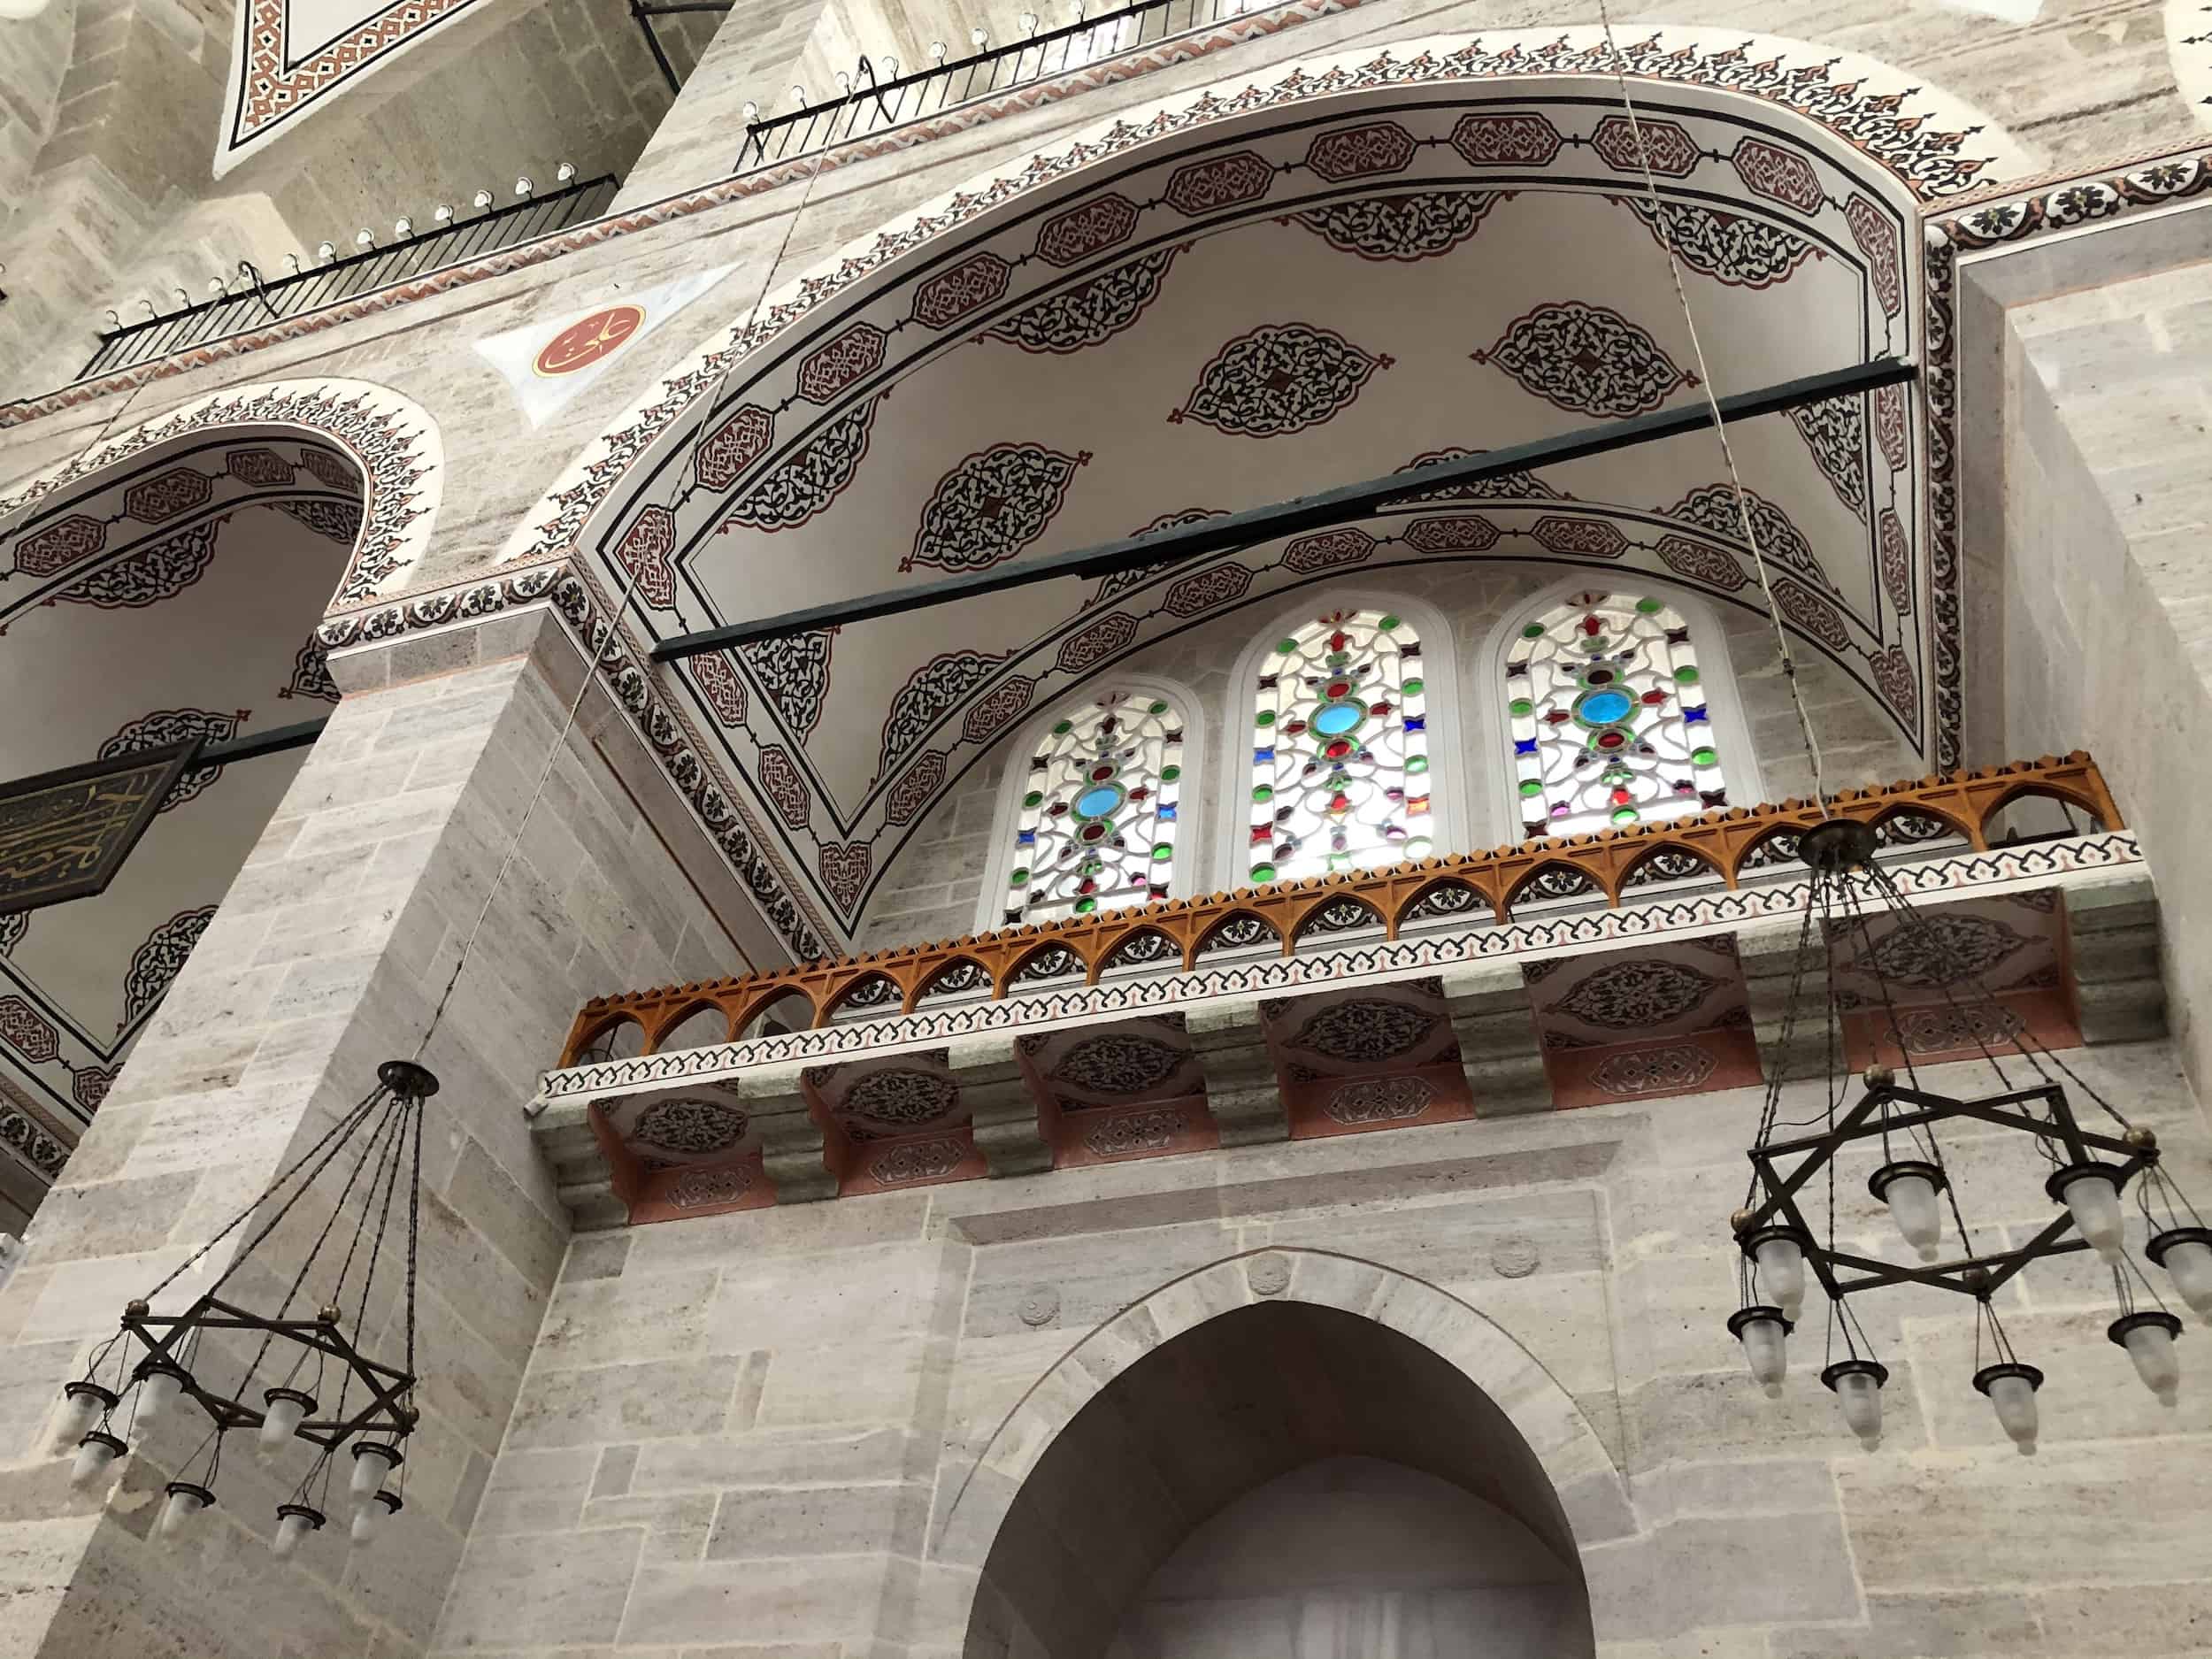 Modern decorations at the Mihrimah Sultan Mosque